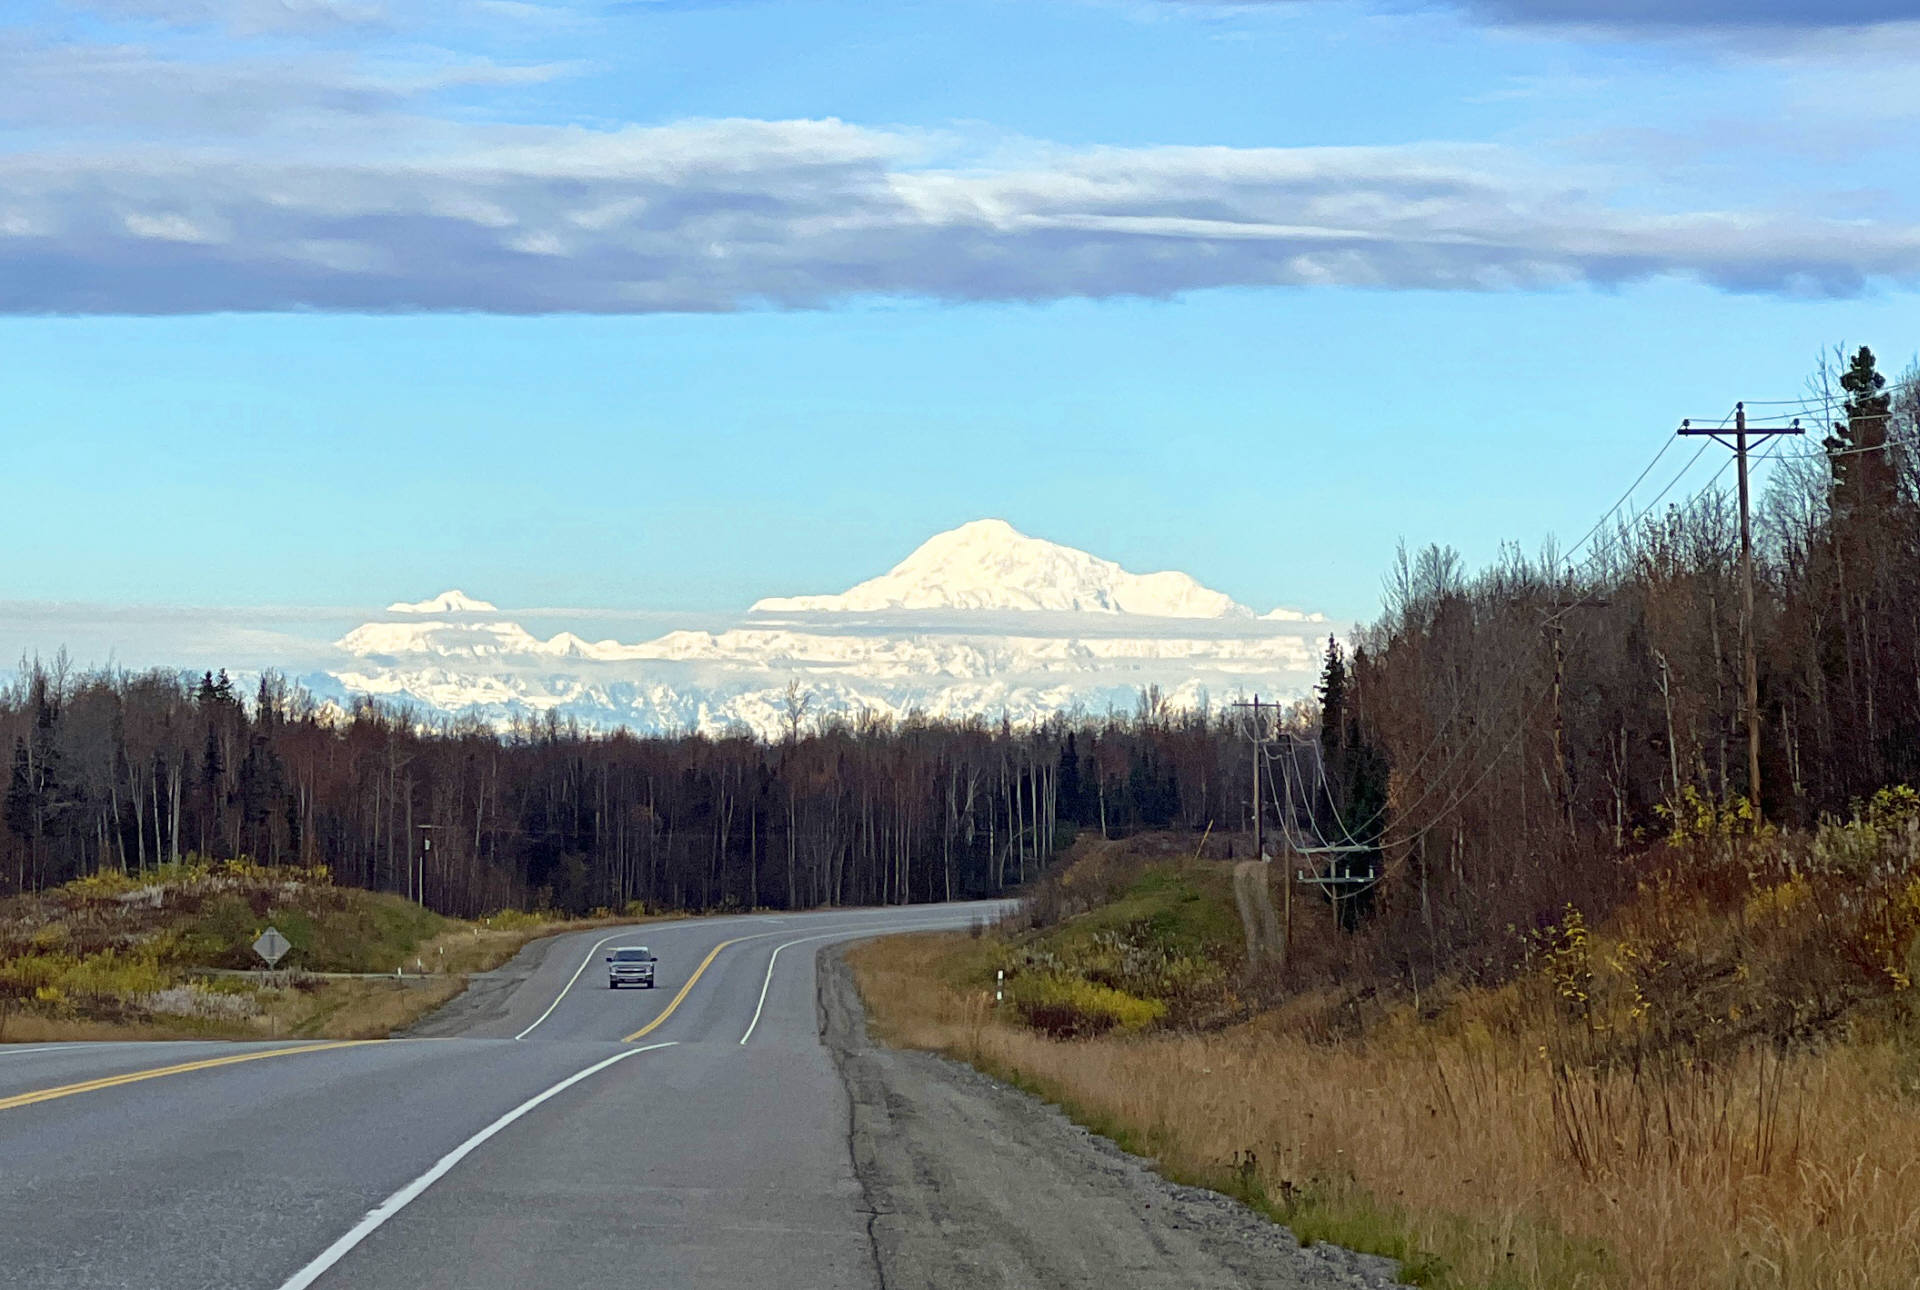 View to the North to Denali Mountain from Parks Highway near Willow, Alaska. Photo: Fyodor Soloview.